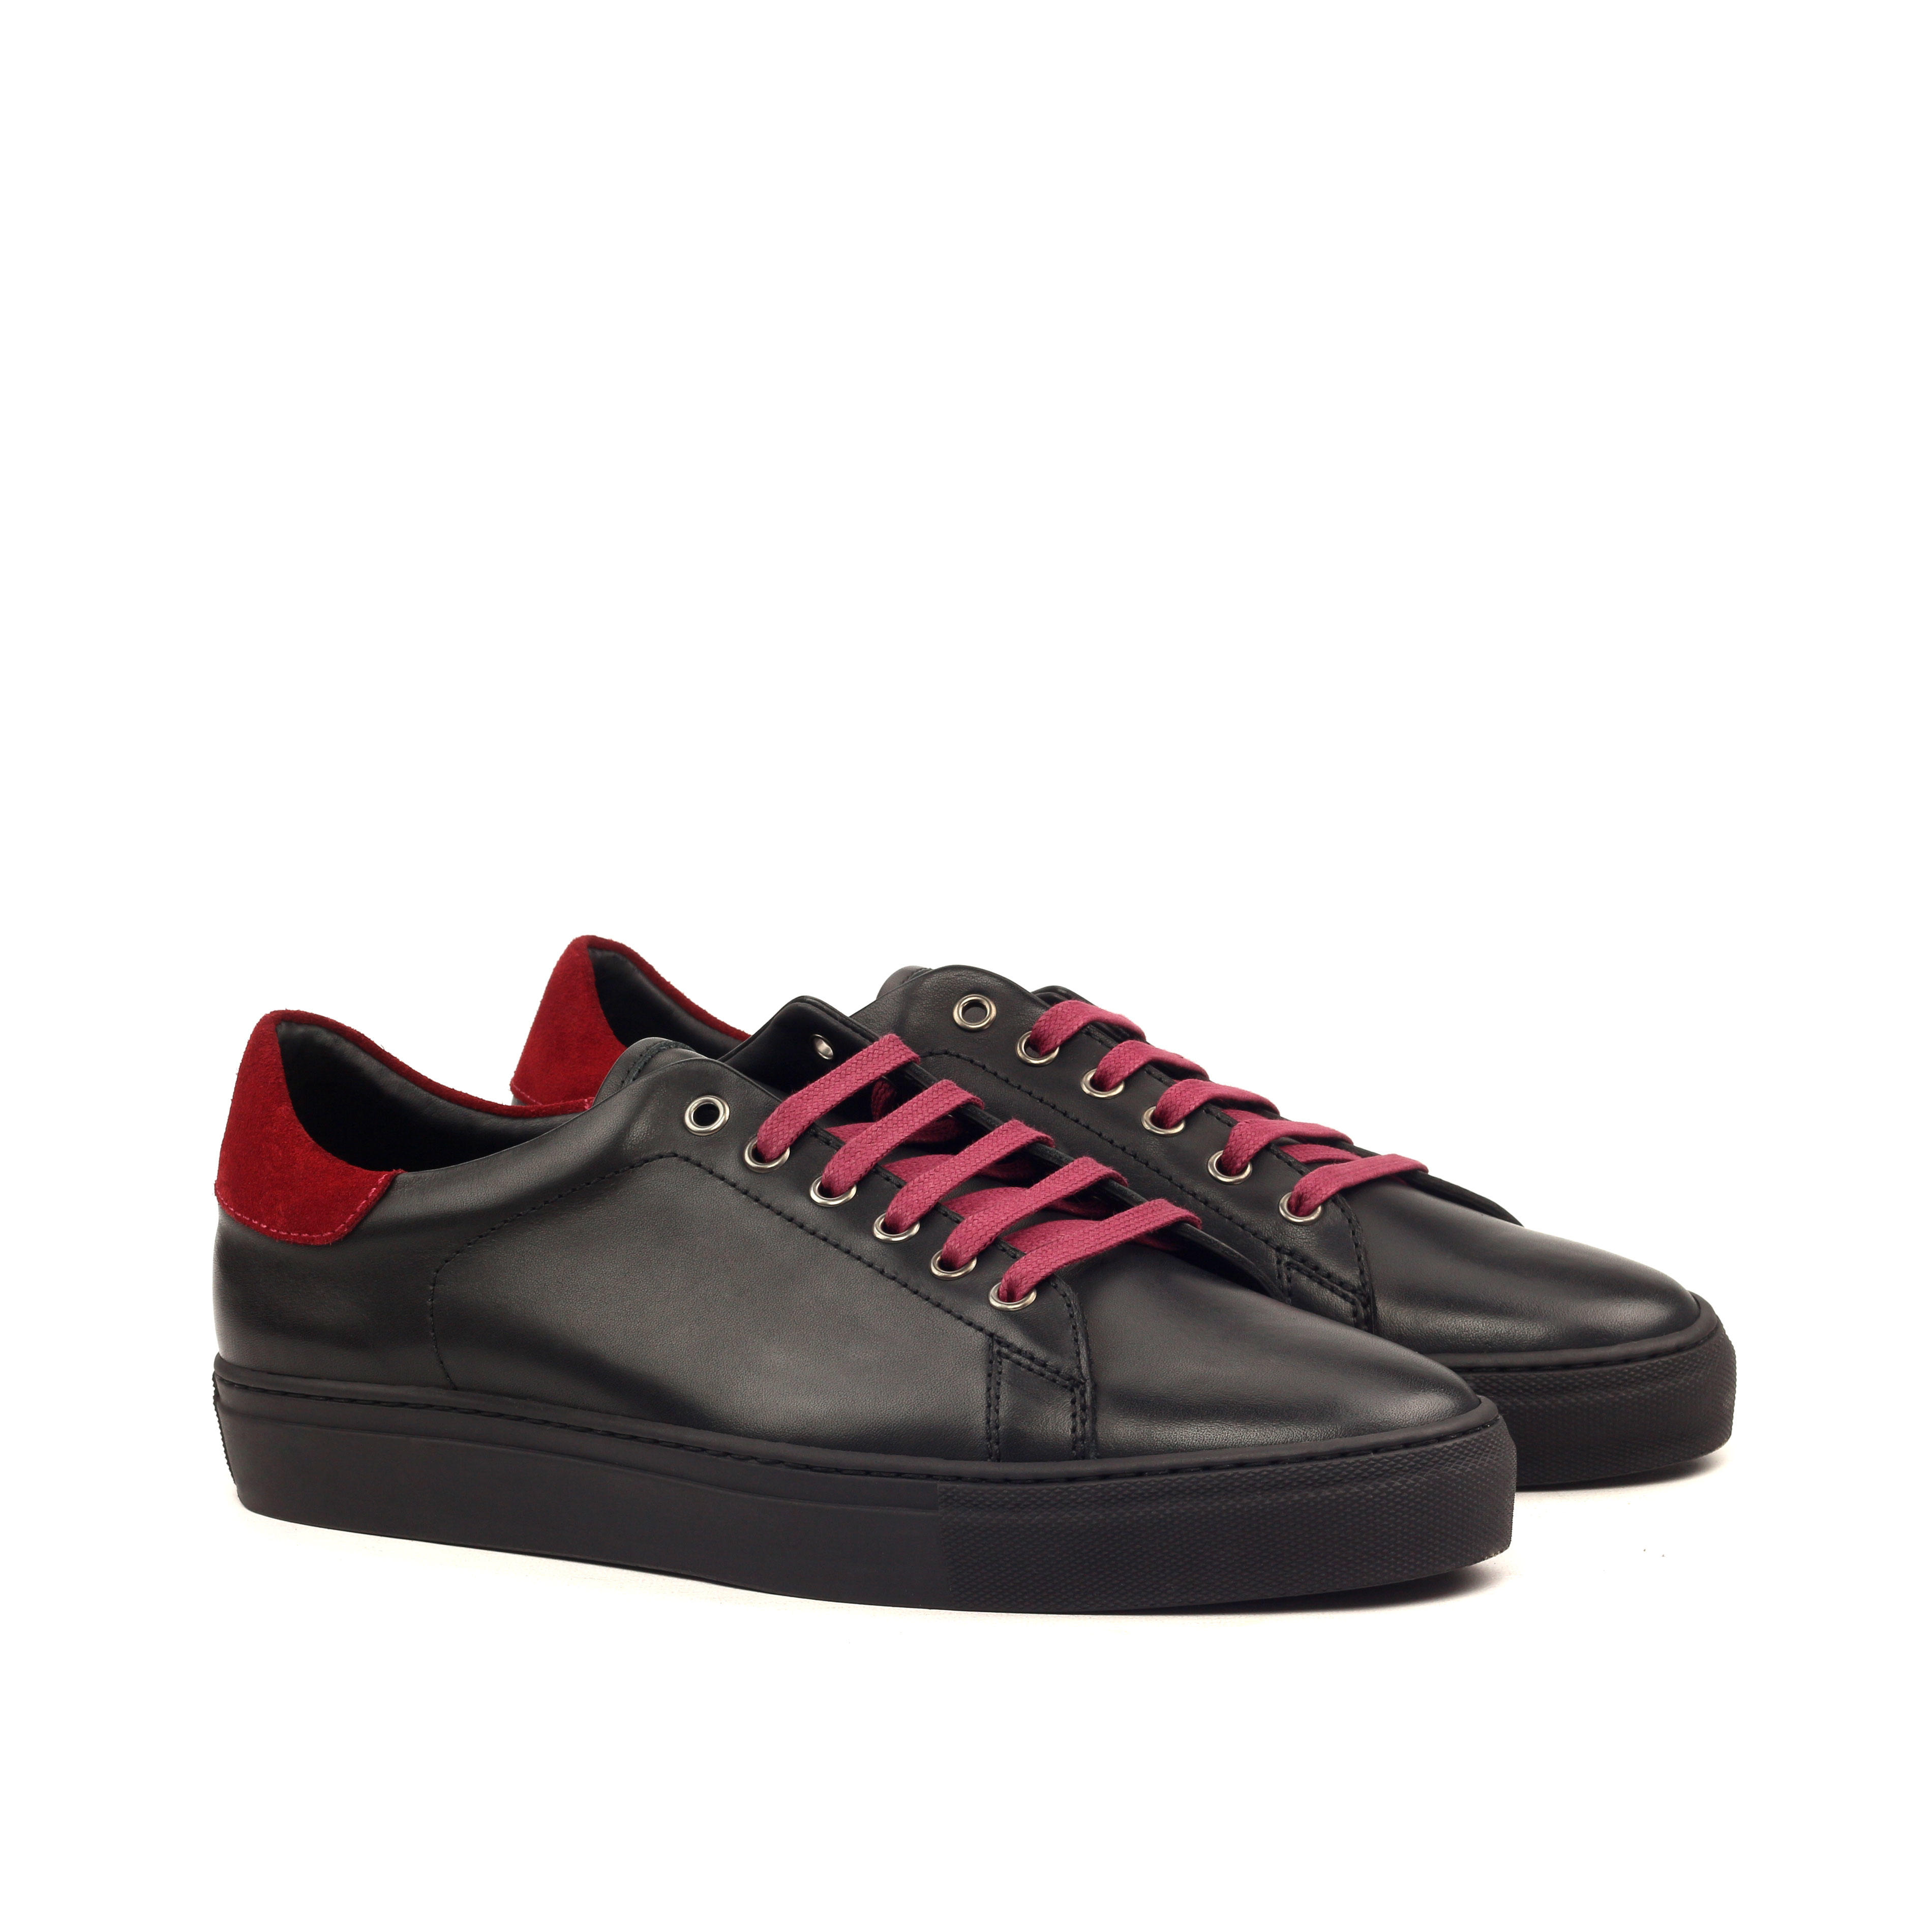 MANOR OF LONDON 'The Perry' Black Hand Painted Calfskin Tennis Trainer Luxury Custom Initials Monogrammed Front Side View